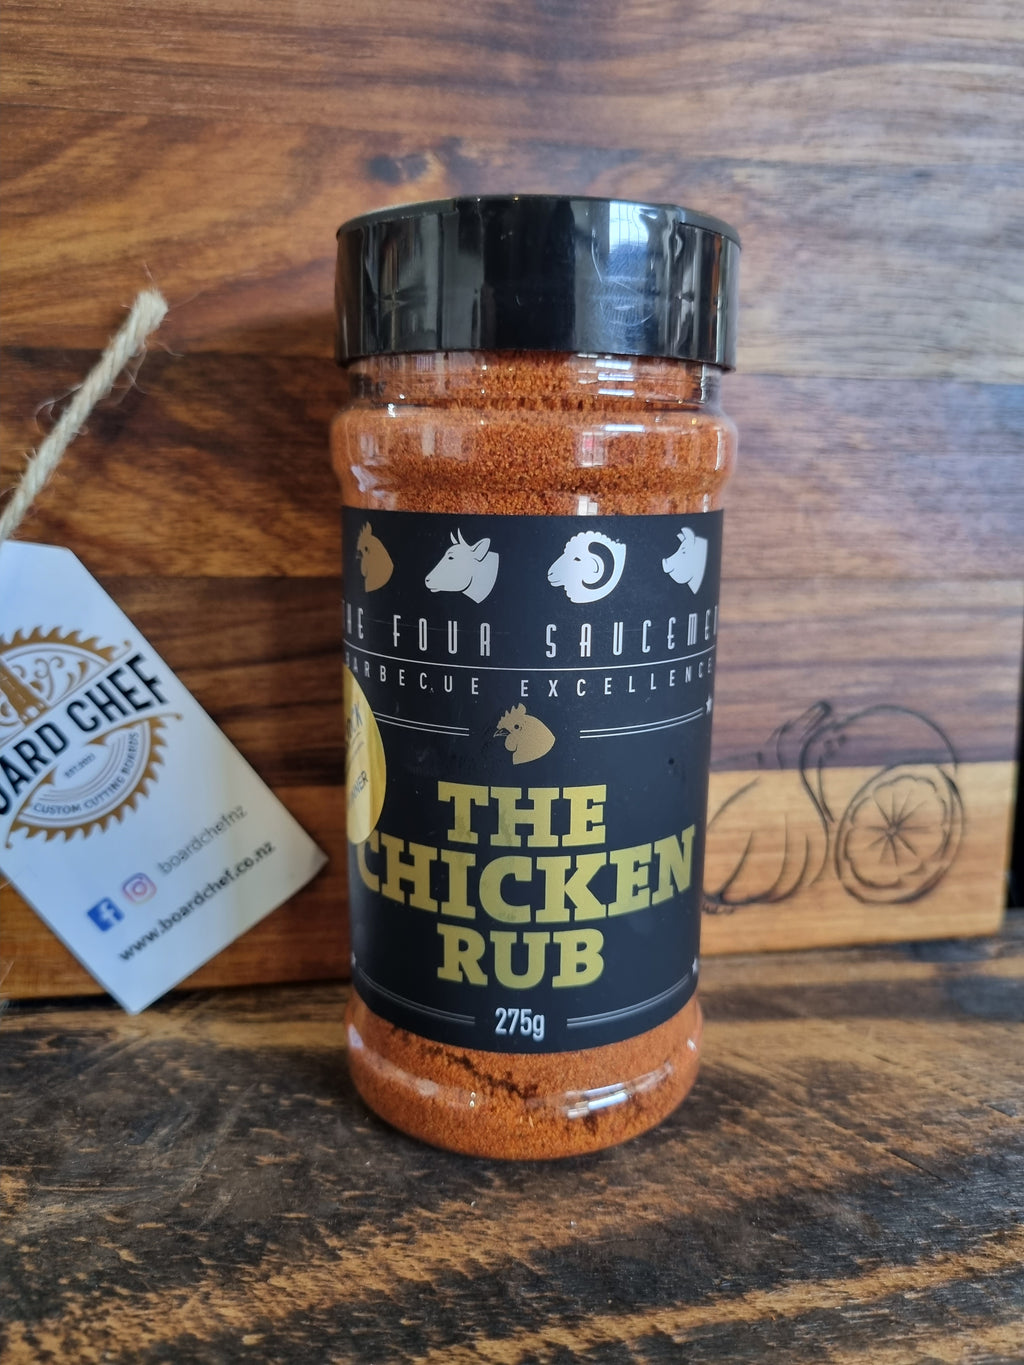 The Chicken Rub by The Four Saucemen